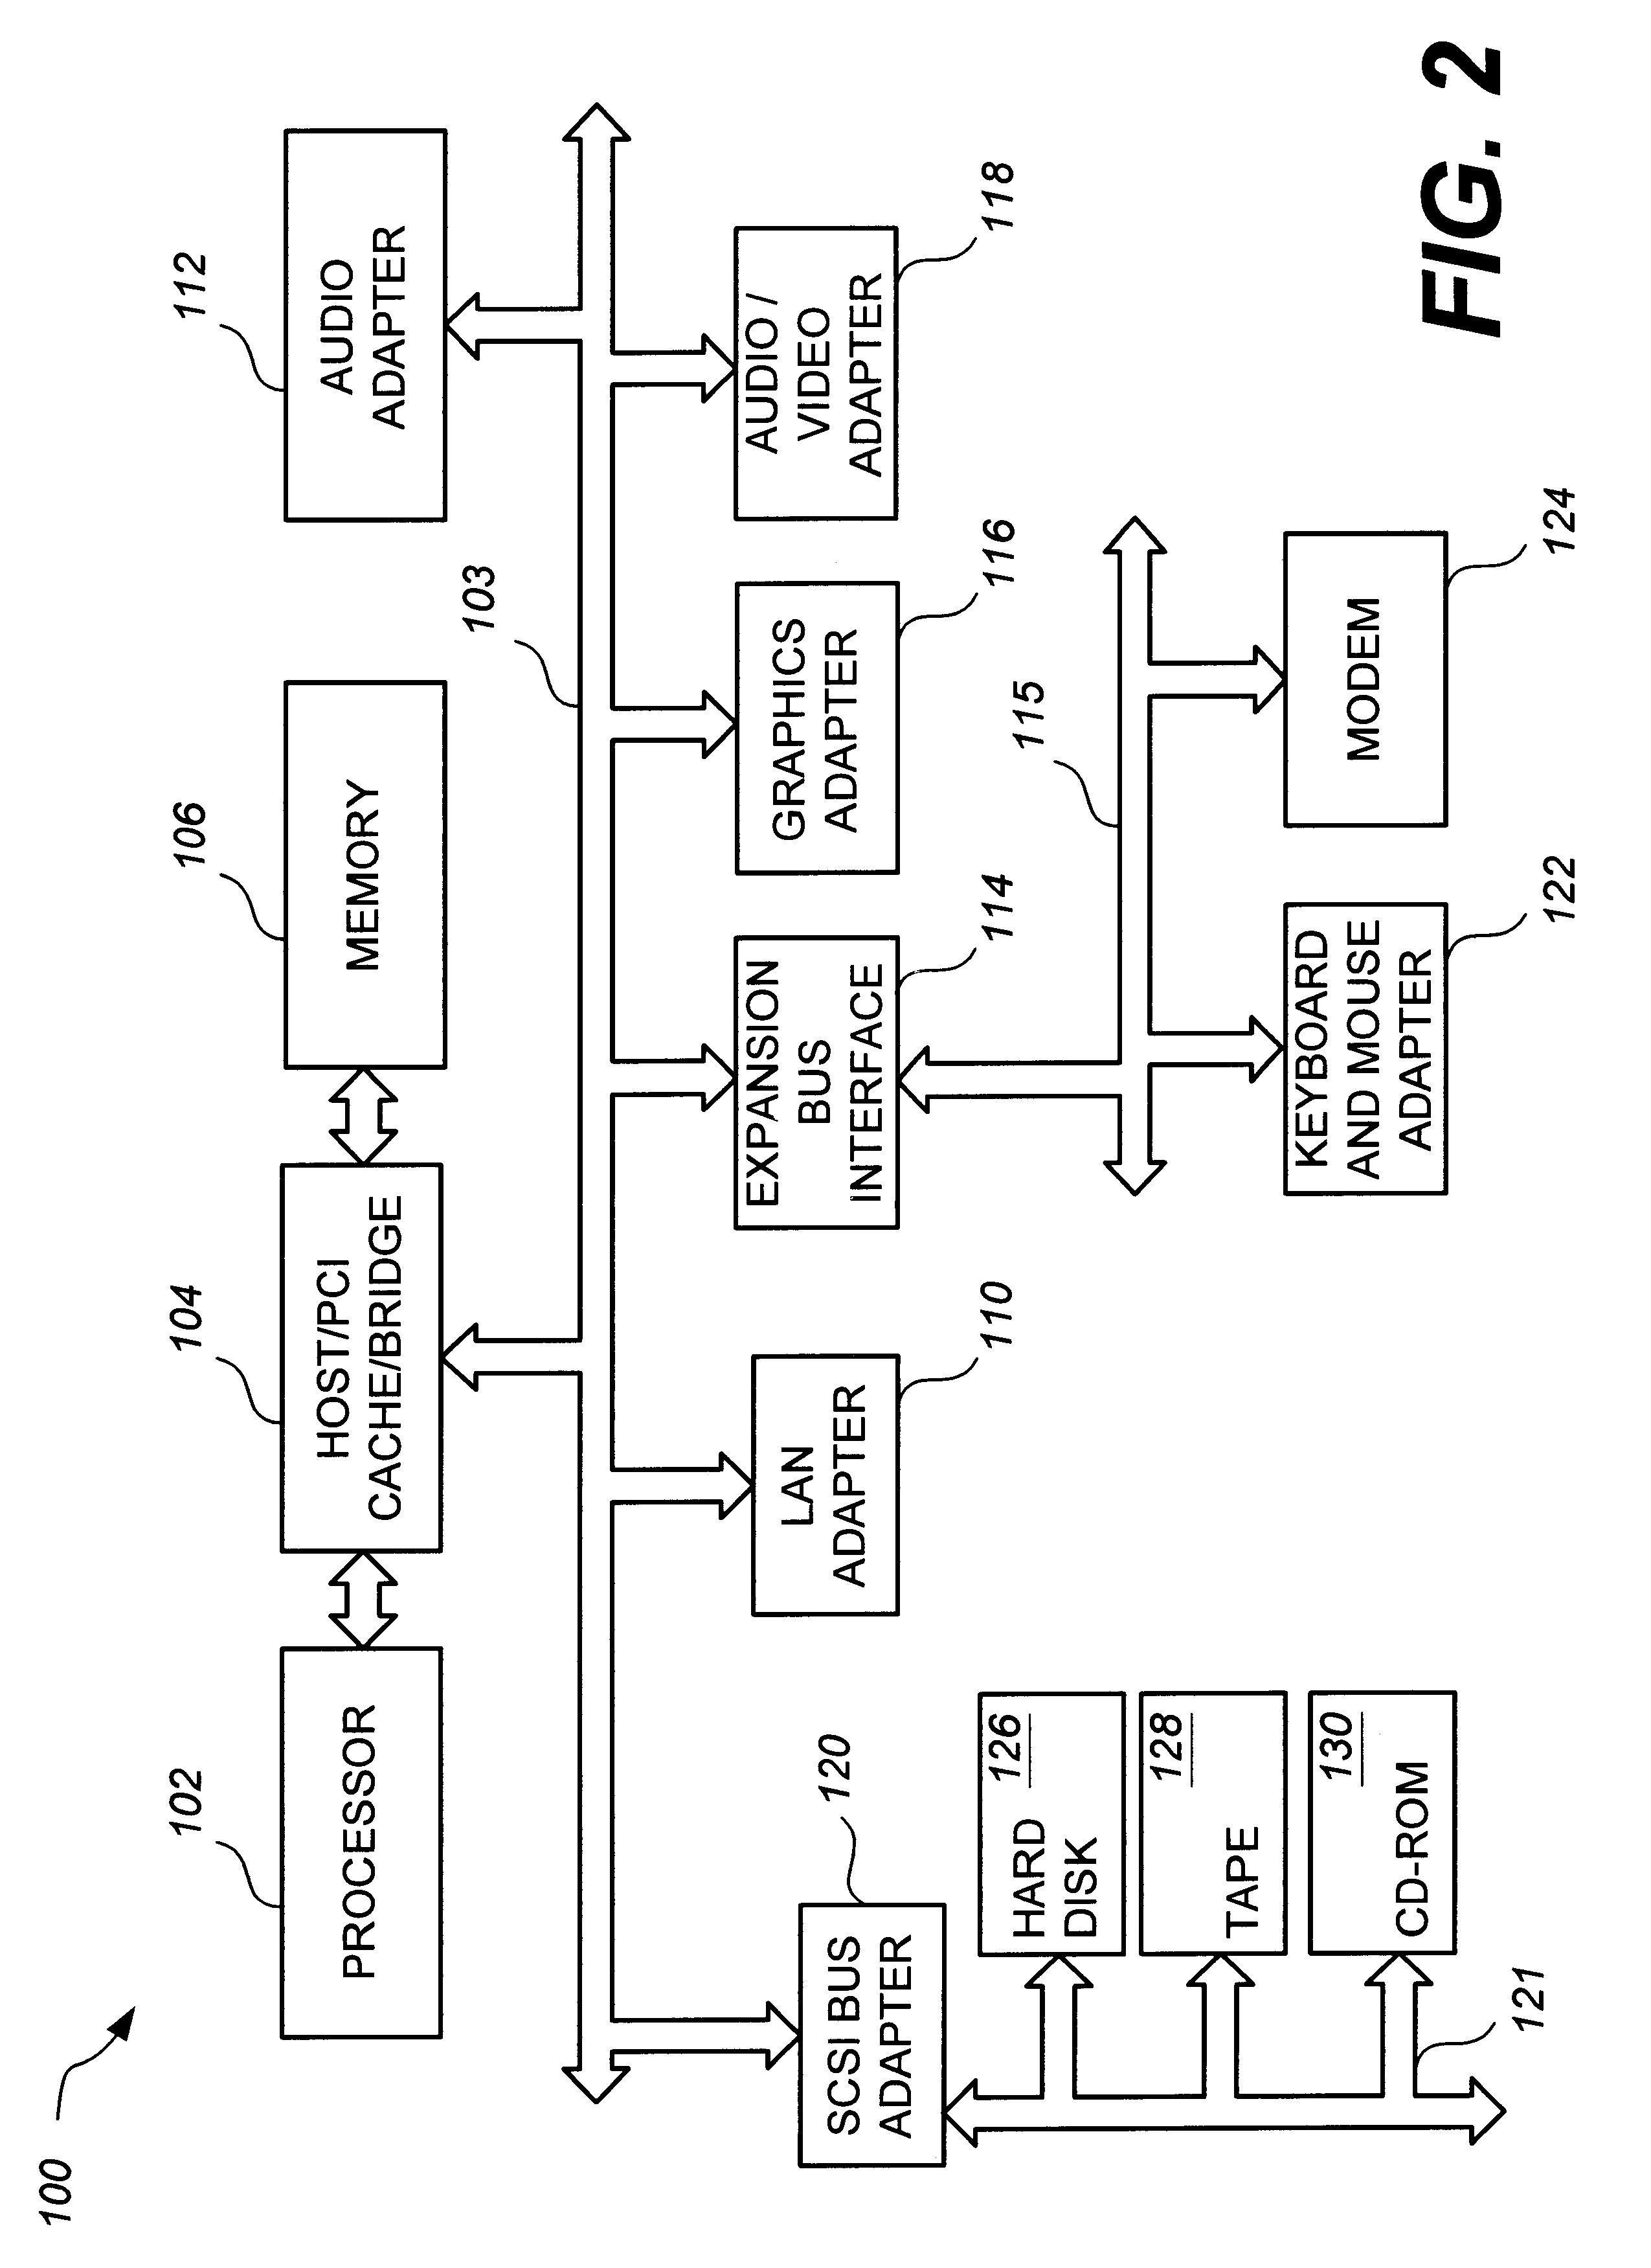 Assembly and method for constructing a multi-die integrated circuit